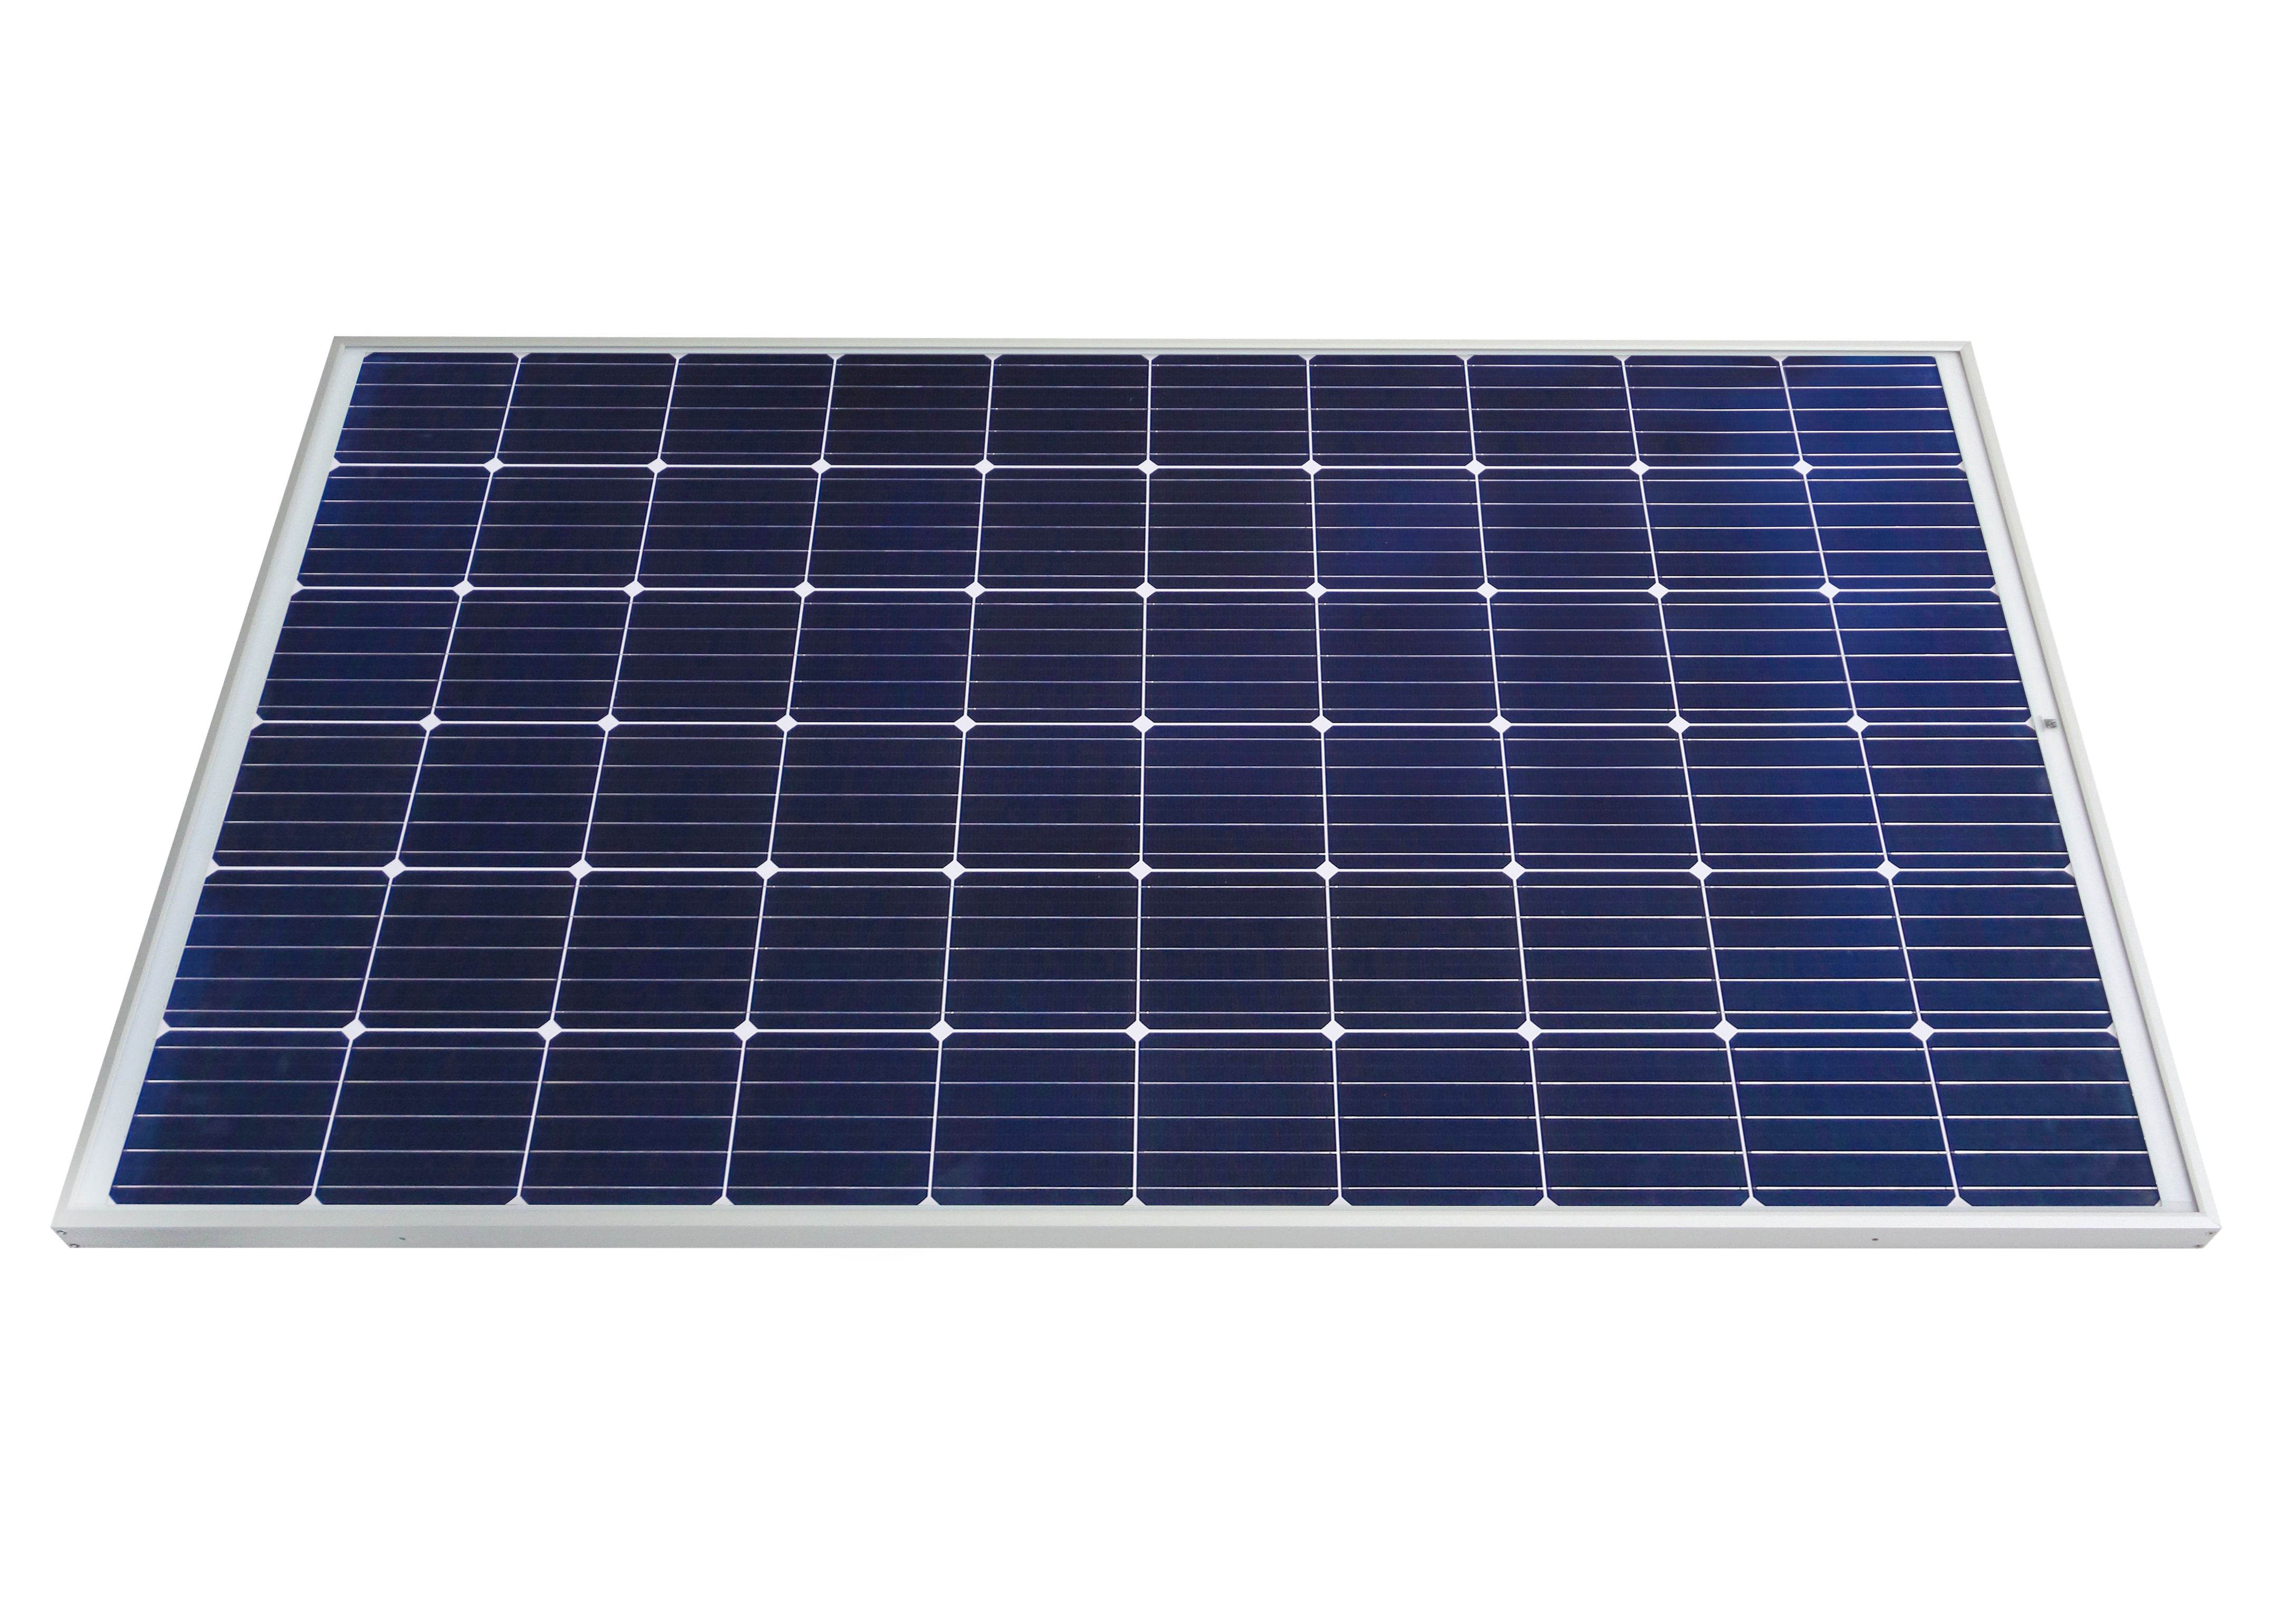 Astronergy Penta: New solar modules with more powerful 5-busbar ...